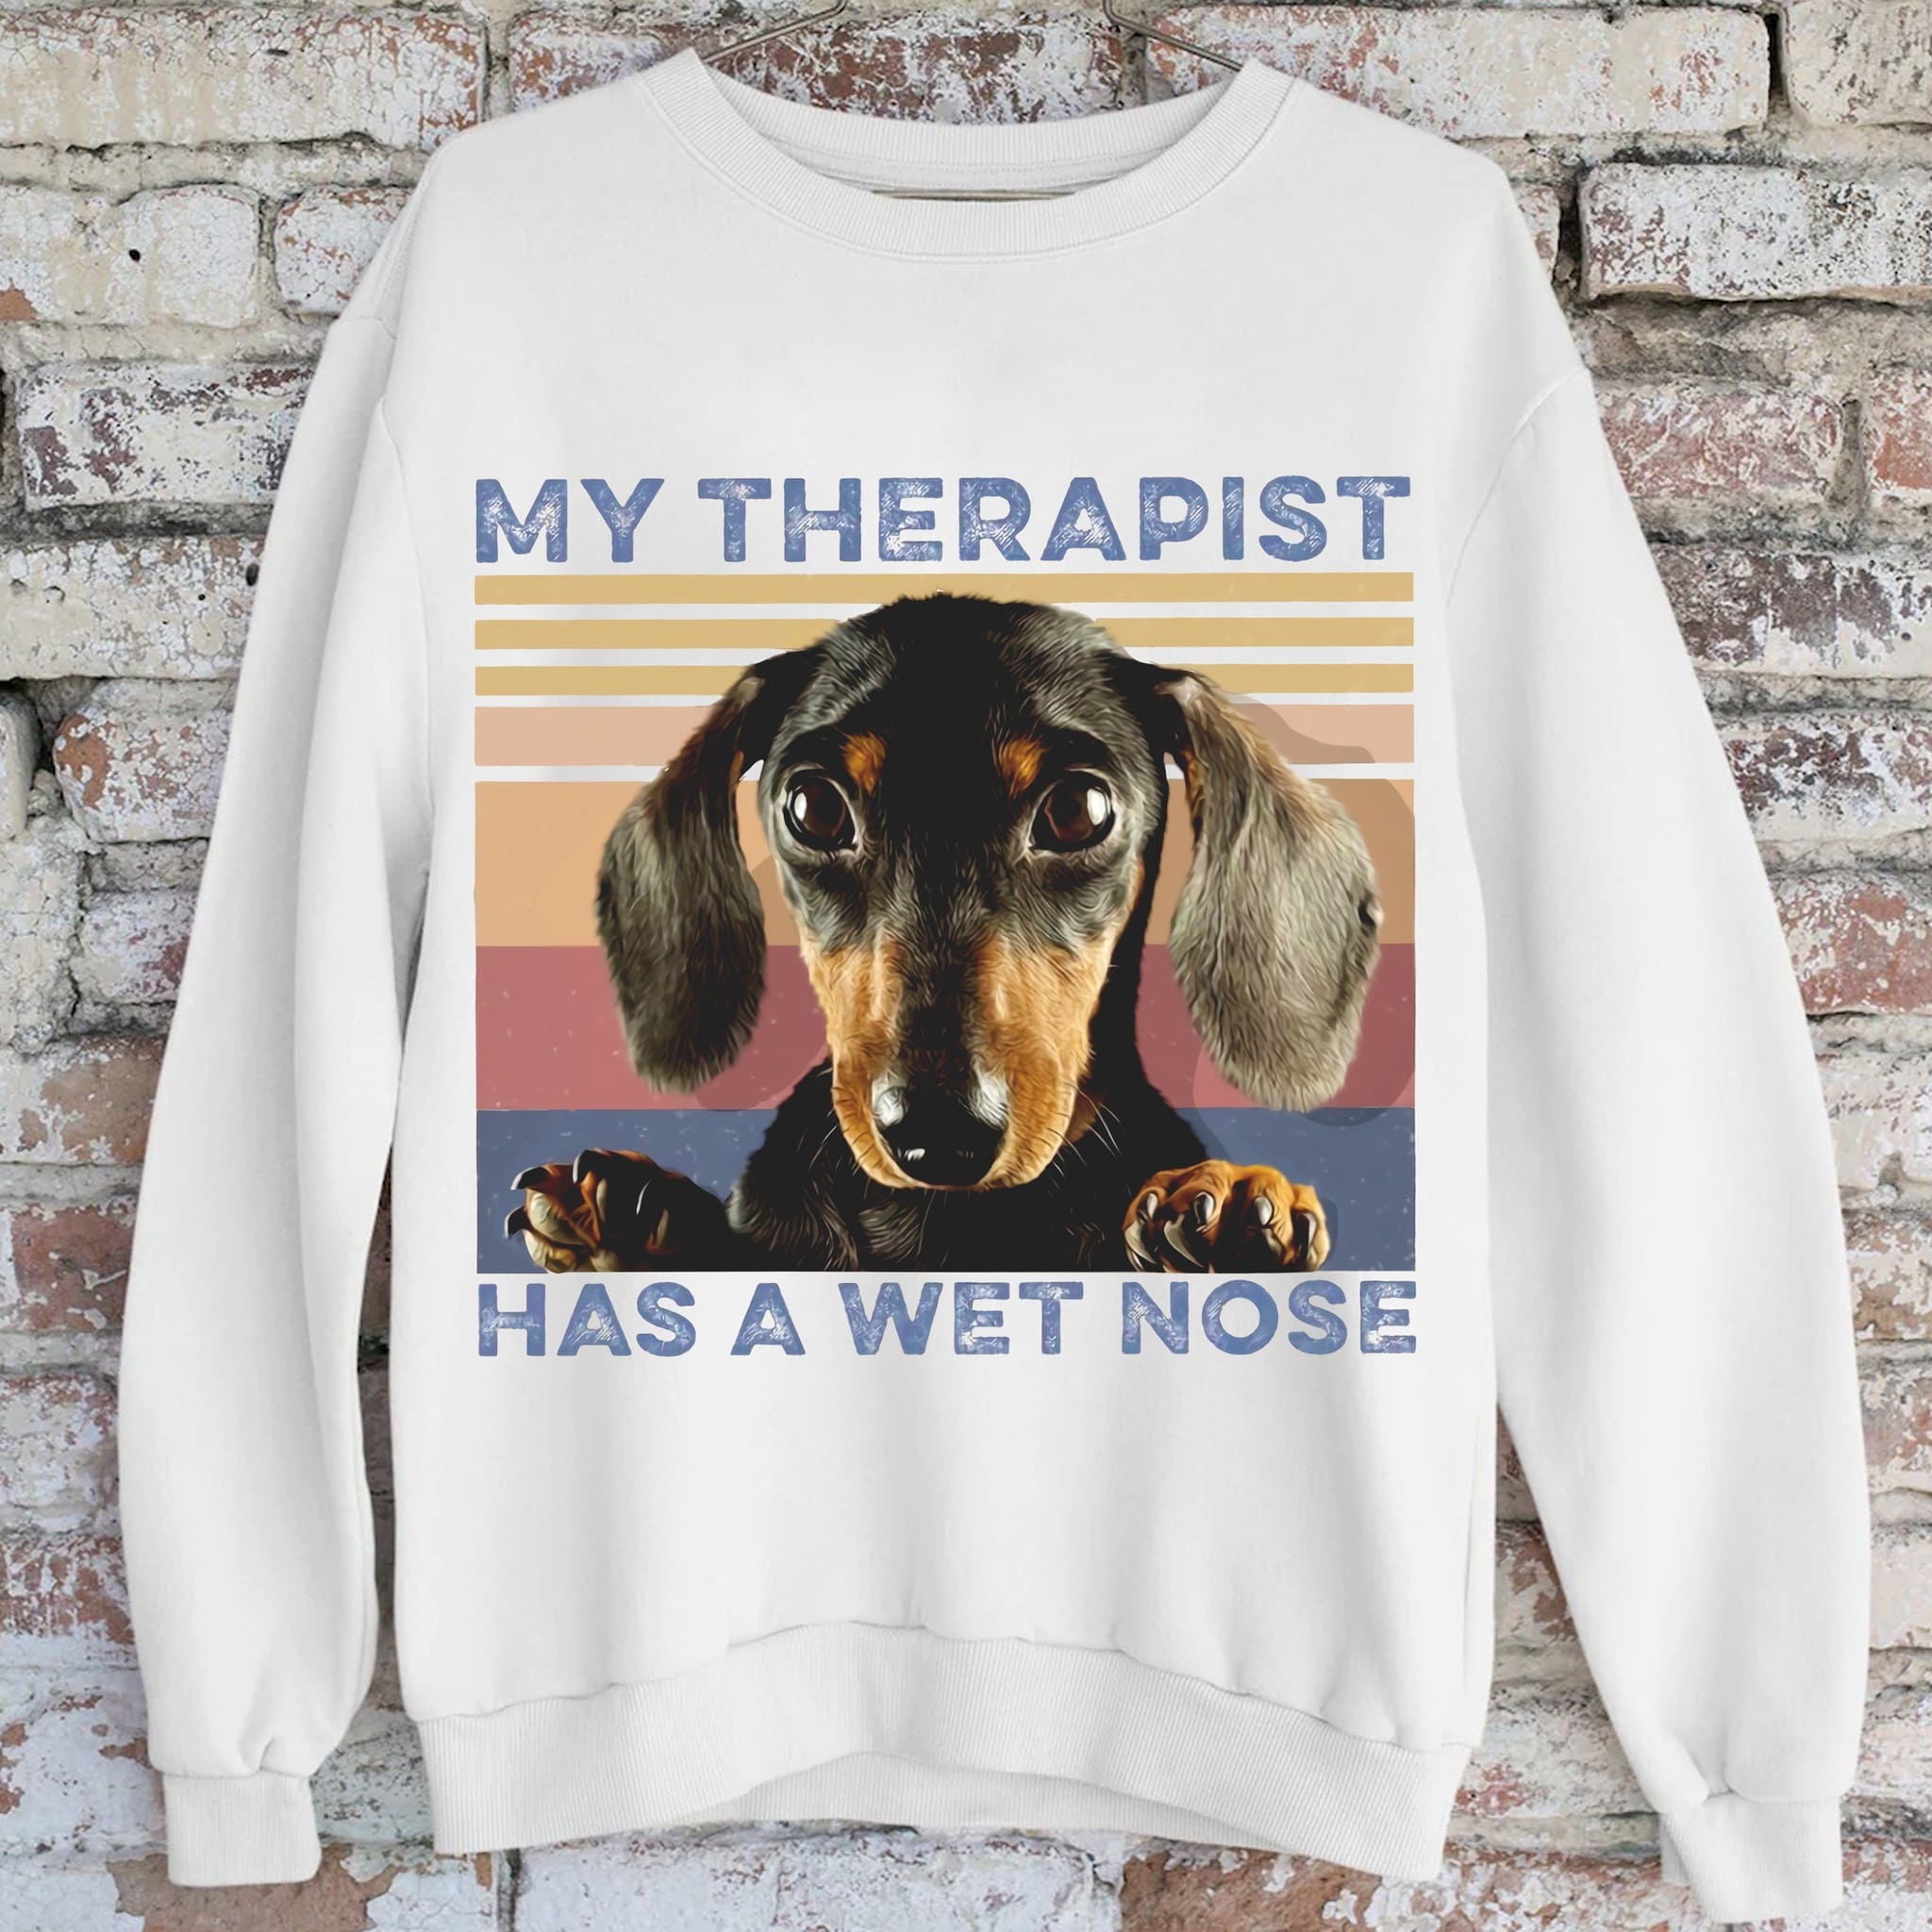 Dachshund Graphic T-shirt - My therapist has a wet nose